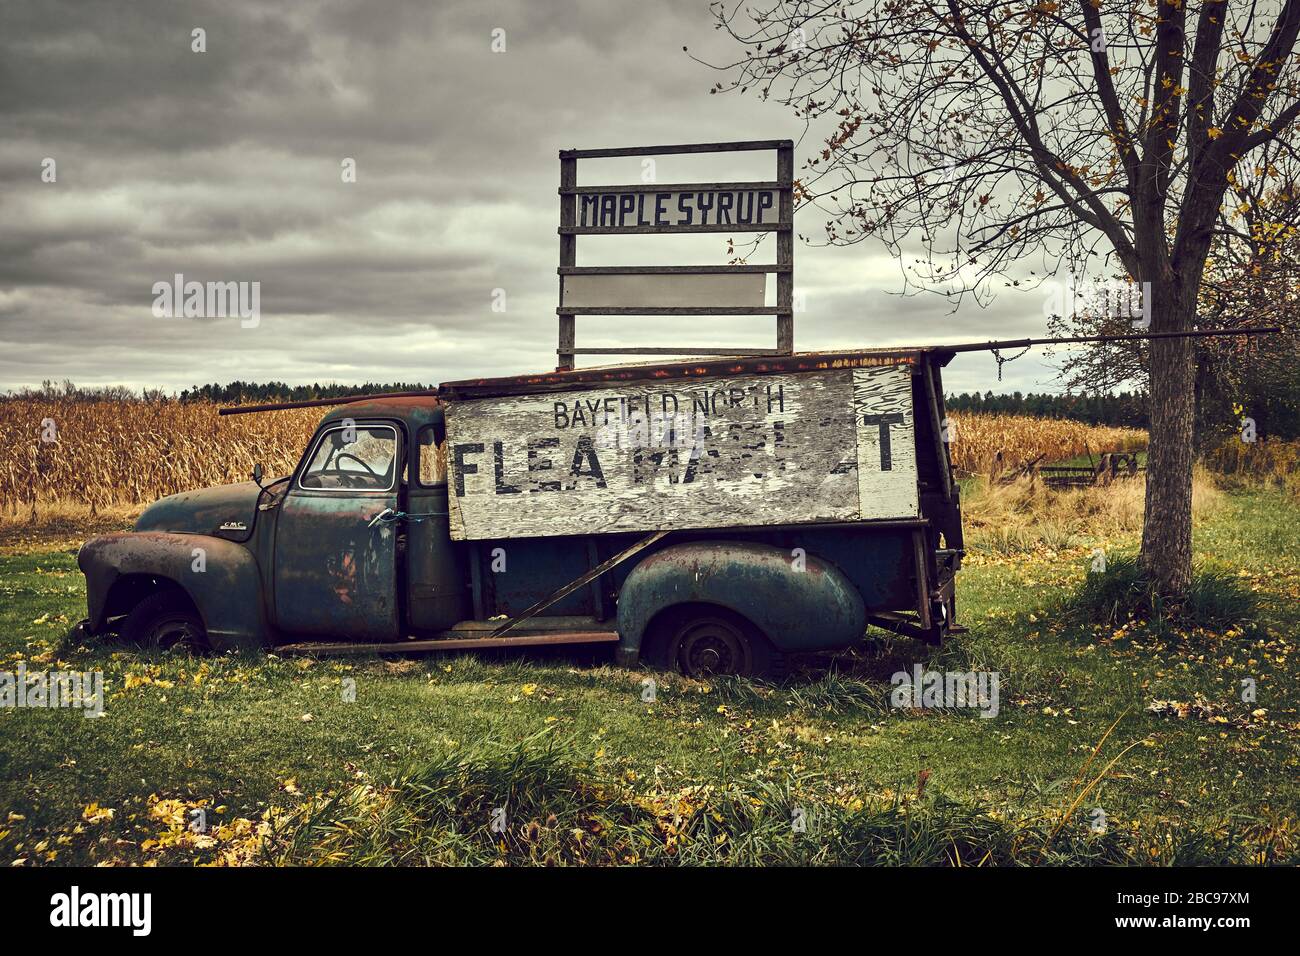 Old green abandoned rusty GMC truck being used as a flea market and maple syrup sign. Autumn scene. Stock Photo